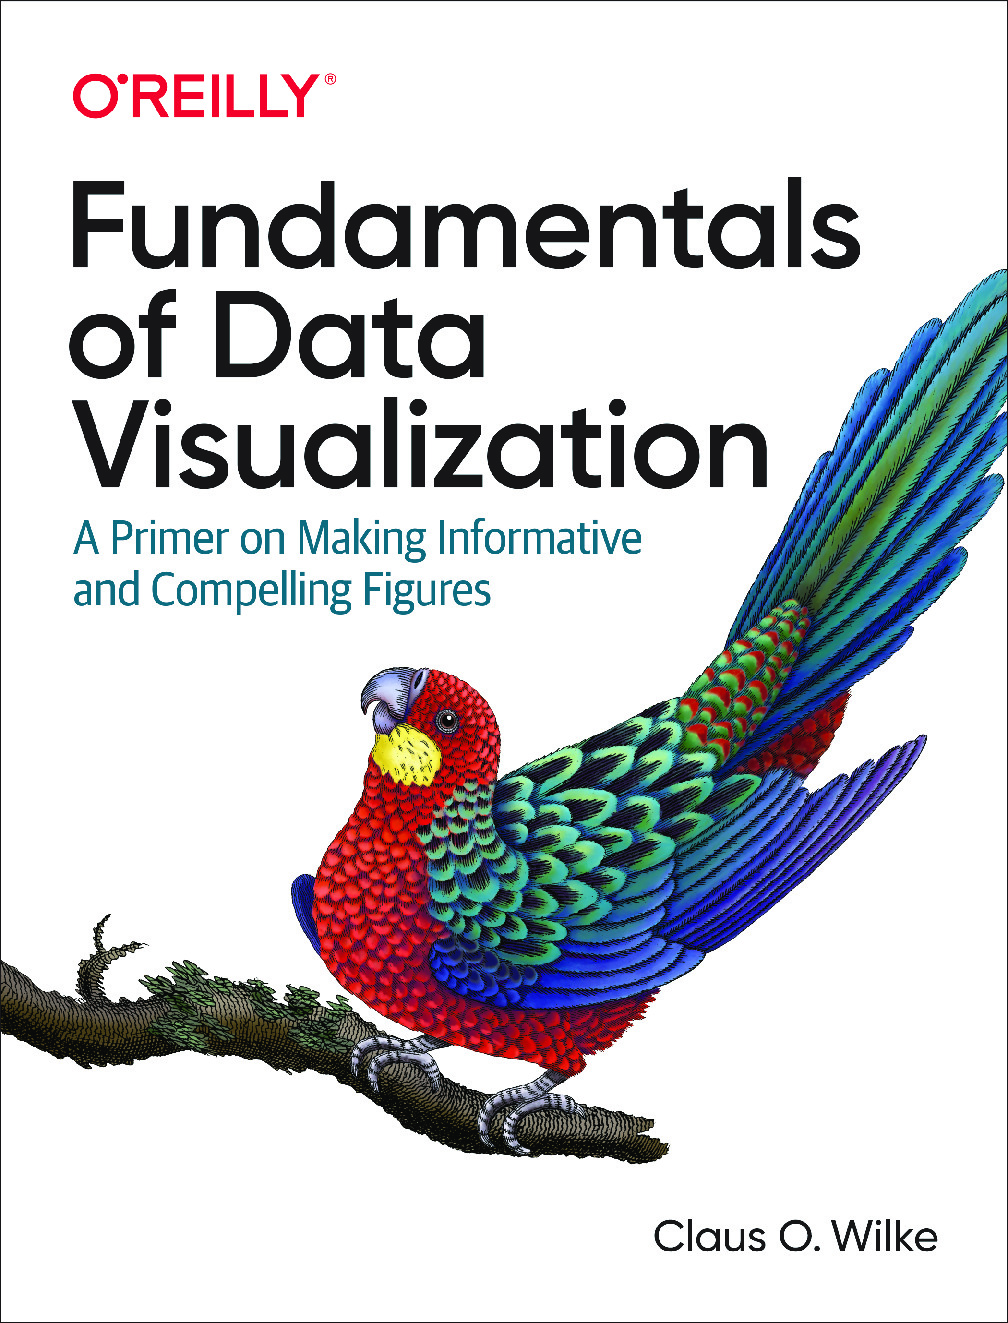 Fundamentals of Data Visualization – A Primer on Making Informative and Compelling Figures